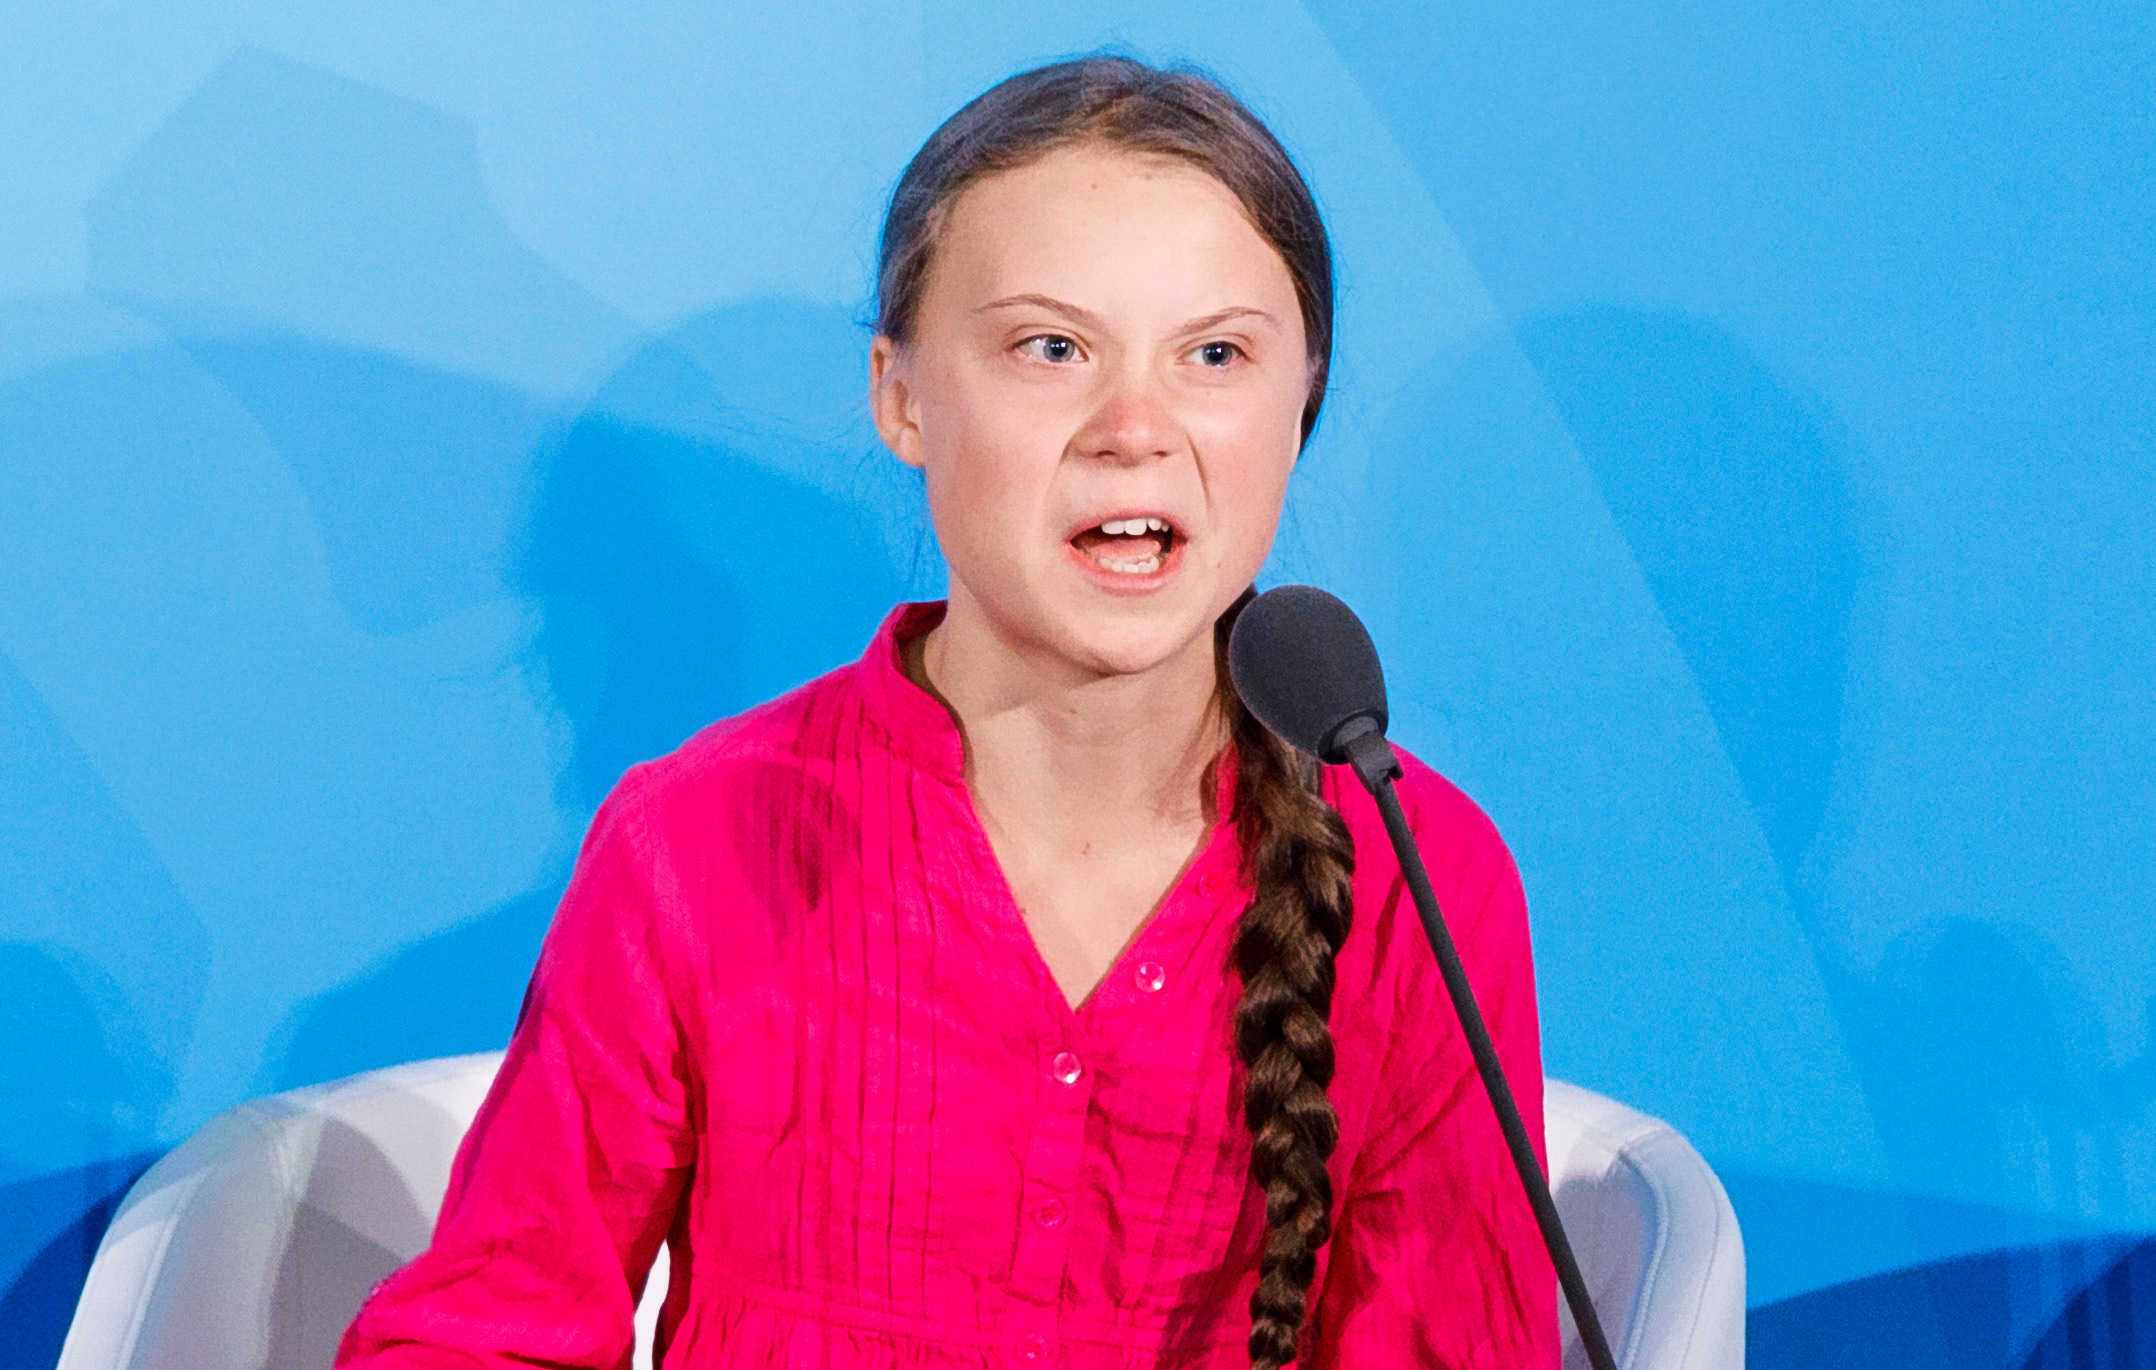 Mandatory Credit: Photo by JUSTIN LANE/EPA-EFE/Shutterstock (10421665ds)
Sixteen-year-old climate activist Greta Thunberg addresses world leaders at the start of the 2019 Climate Action Summit which is being held in advance of the General Debate of the General Assembly of the United Nations at United Nations Headquarters in New York, New York, USA, 23 September 2019. World Leaders have been invited to speak at the event, which was organized by the United Nations Secretary-General Antonio Guterres, for the purpose of proposing plans for addressing global climate change. The General Debate of the 74th session of the UN General Assembly begins on 24 September.
United Nations 2019 Climate Action Summit, New York, USA - 23 Sep 2019